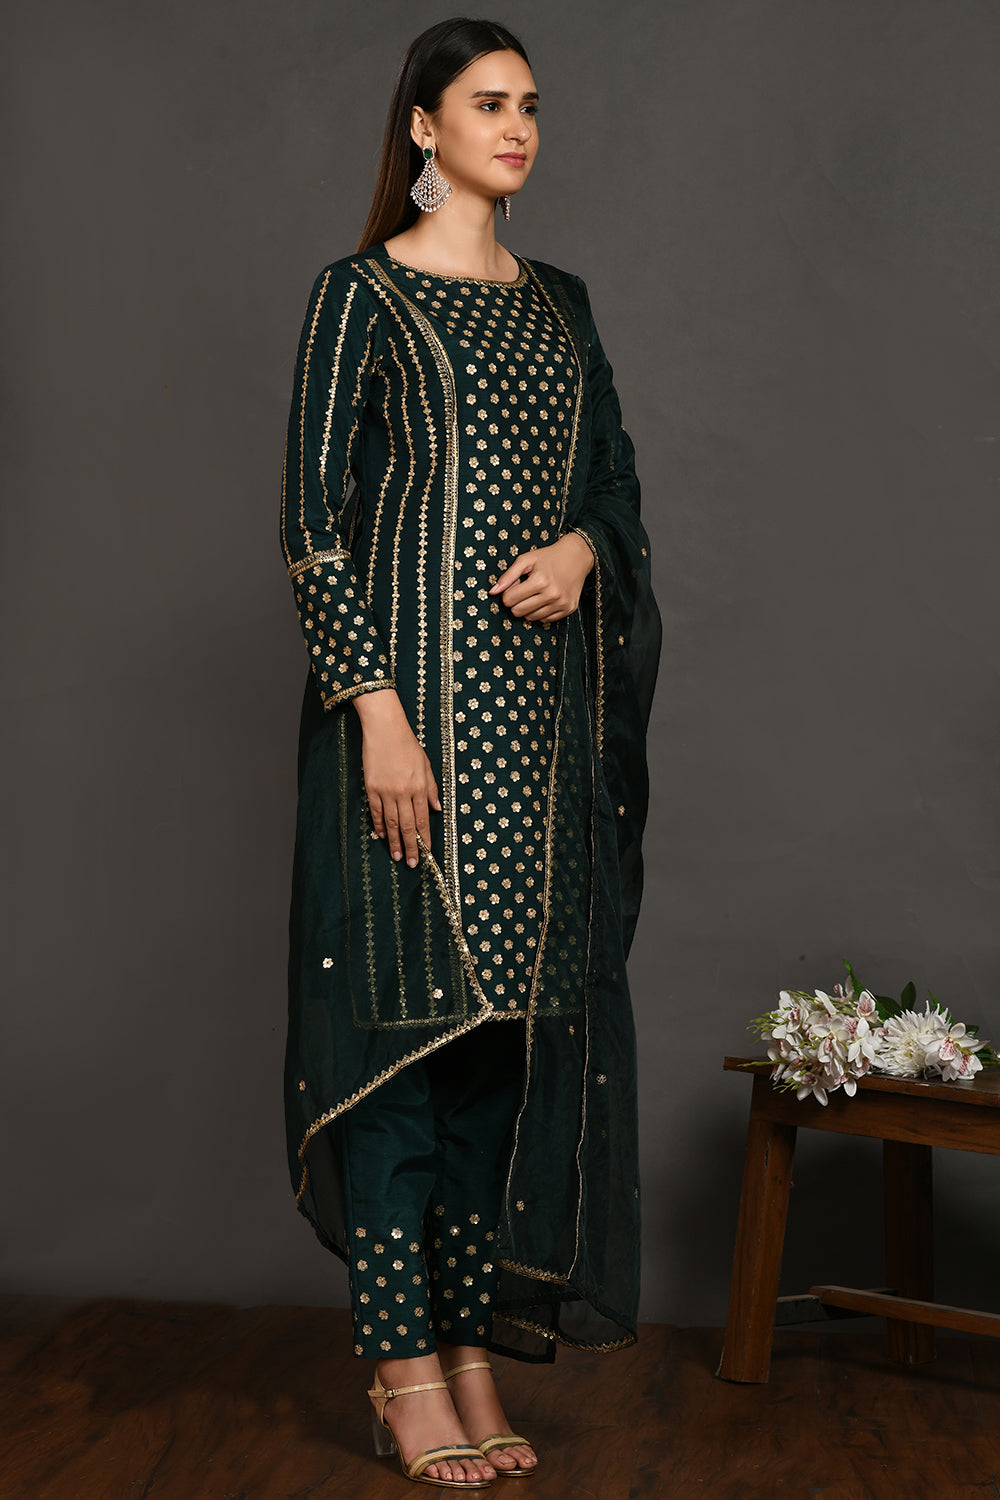 Shop stunning bottle green cutdana, sequin and zari work silk suit online in USA. Dazzle on weddings and special occasions with exquisite Indian designer dresses, sharara suits, Anarkali suits, wedding lehengas from Pure Elegance Indian fashion store in USA.-right